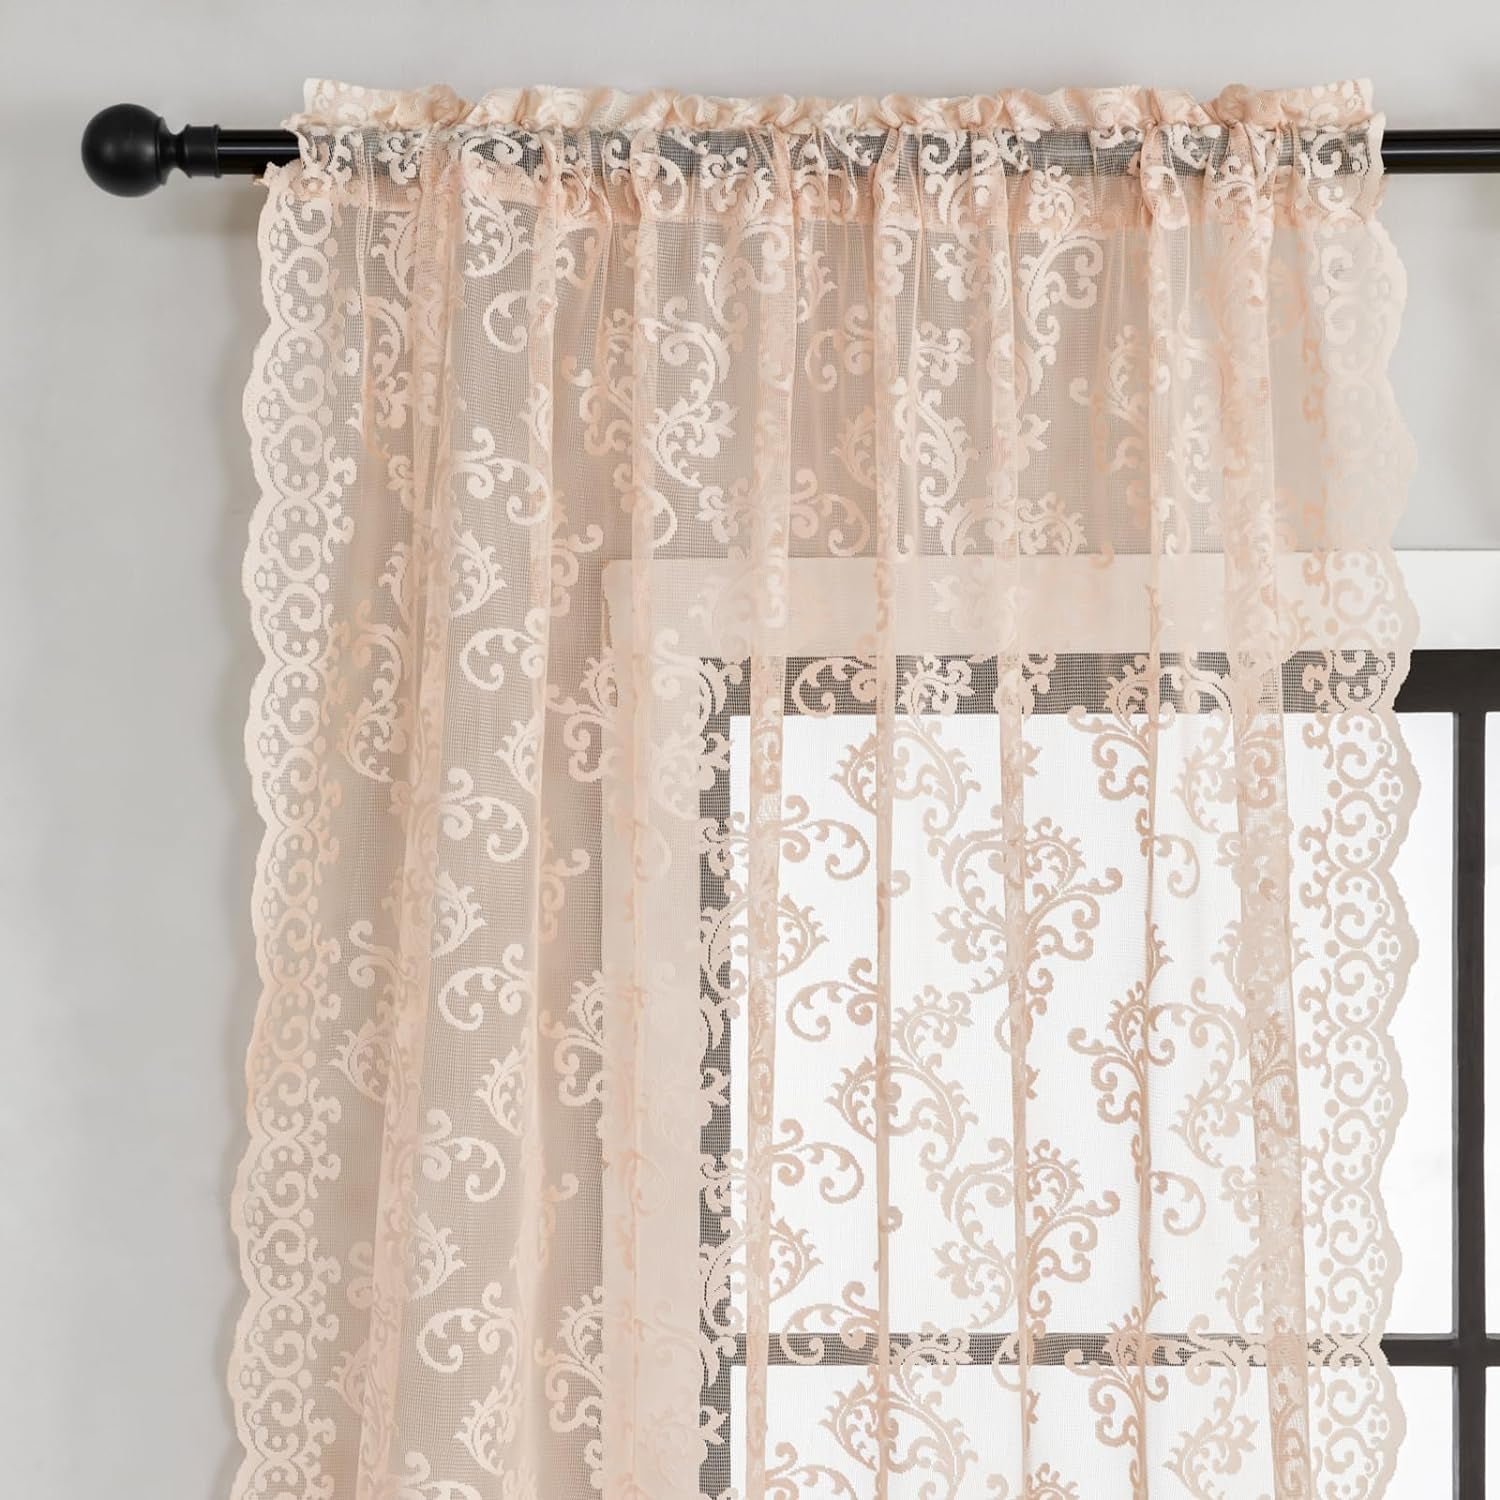 Blush Pink Lace Curtains 84 Inches Long 2 Panels Vintage French Floral Sheer Curtains for Living Room Bedroom Victorian Paisley Drapes Rod Pocket Light Filtering Crochet Window Decor, 52X84  FOLKSIDE   